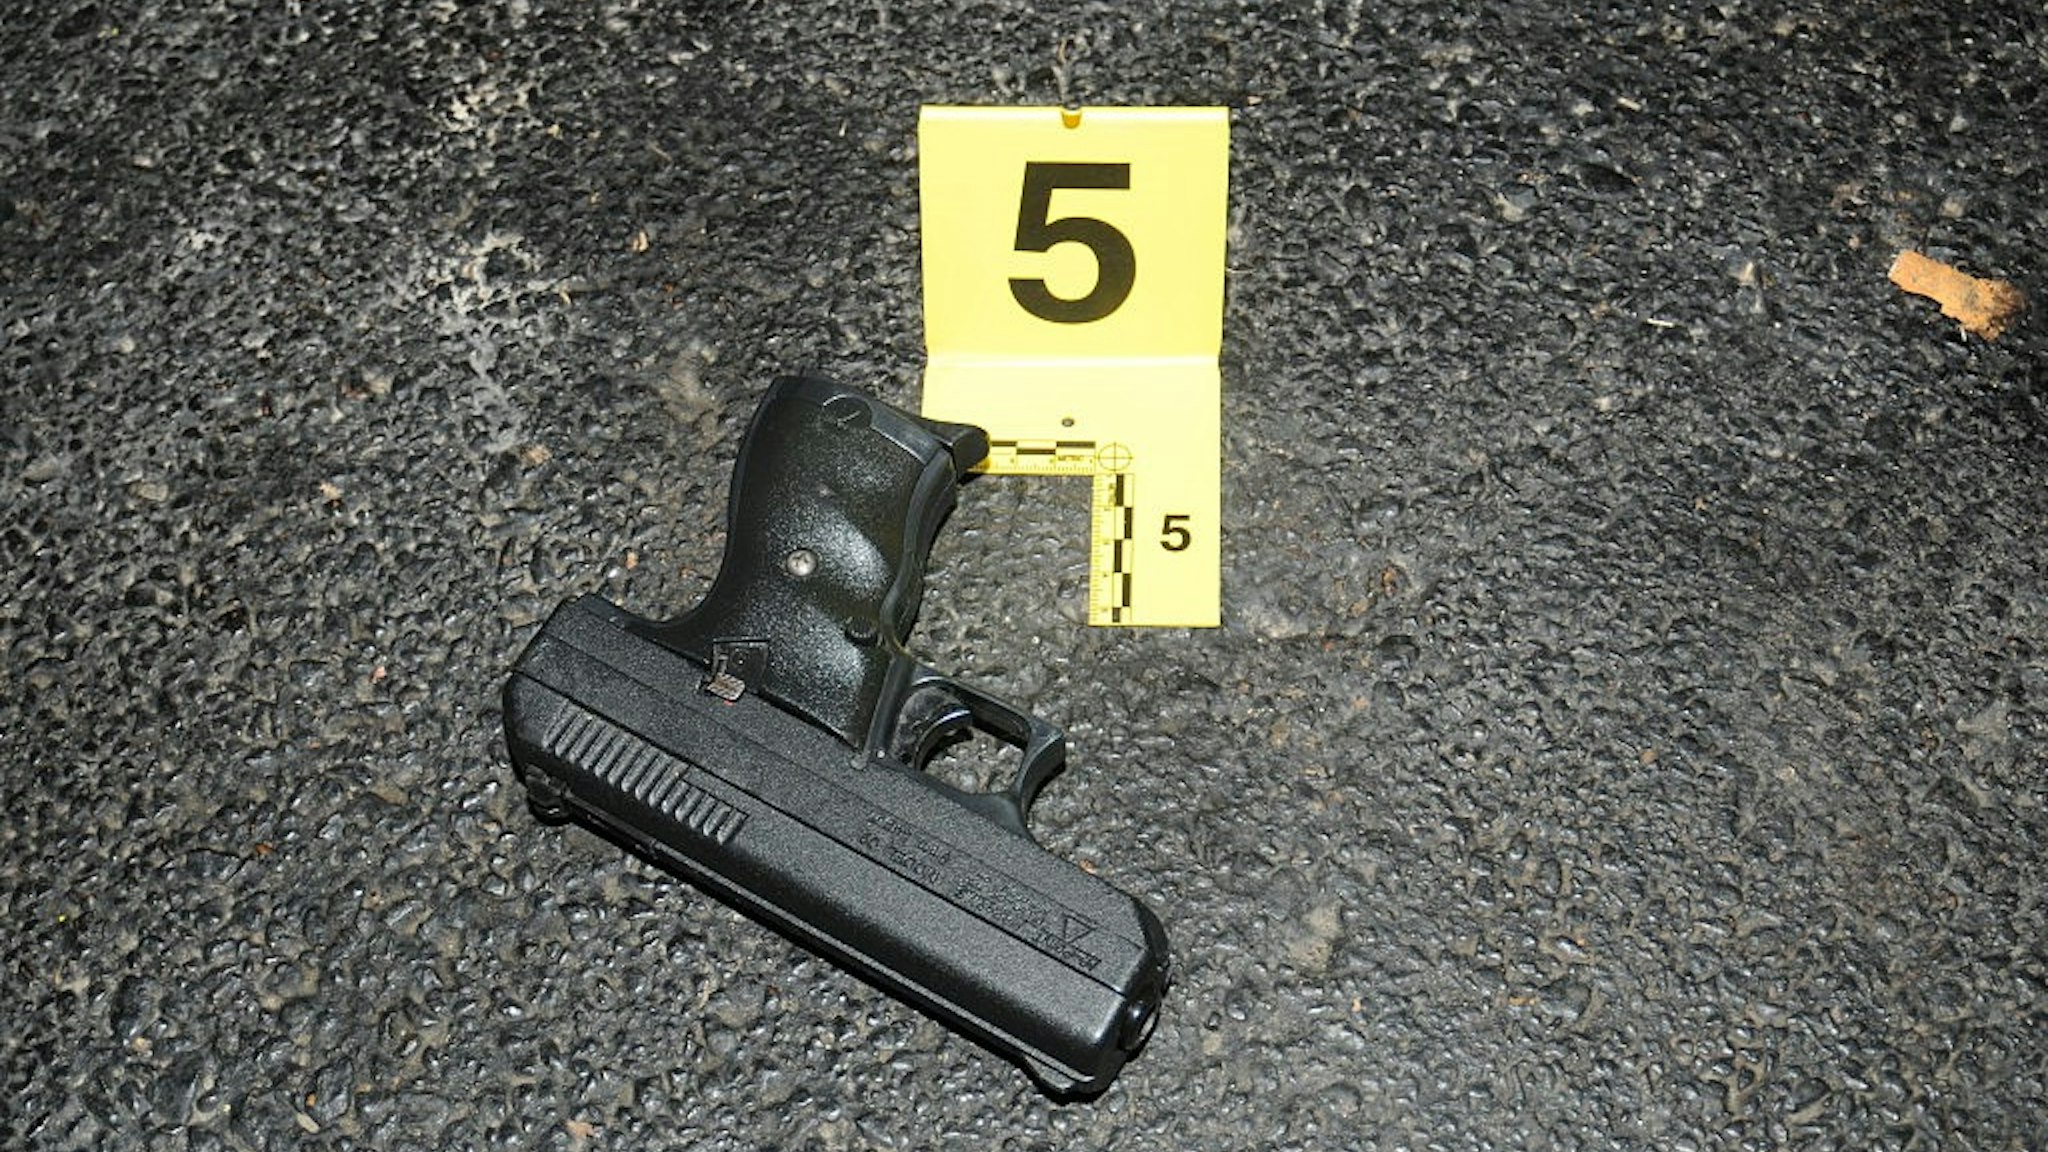 BERKELEY, MISSOURI - DECEMBER 24: In this handout provided by the St. Louis County Police Department, a handgun is pictured that was recovered following the officer involved shooting at the Mobil on the Run gas station on December 24, 2014 in Berkeley, Missouri.